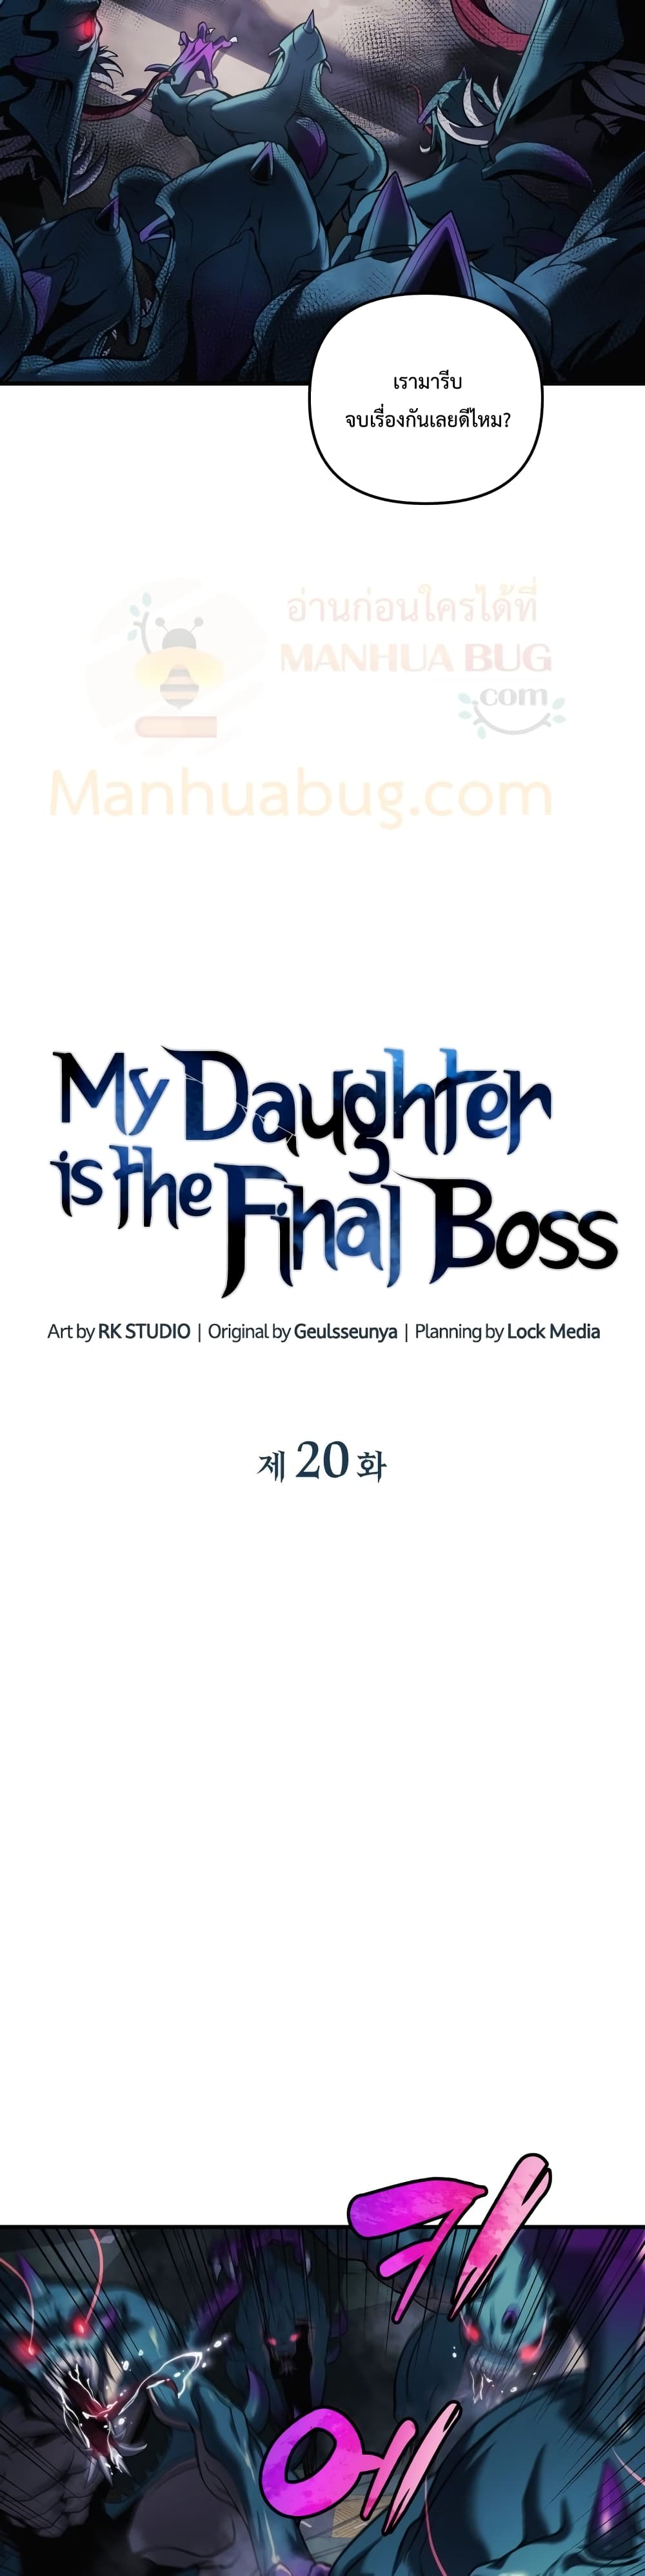 My Daughter is the Final Boss 20-20